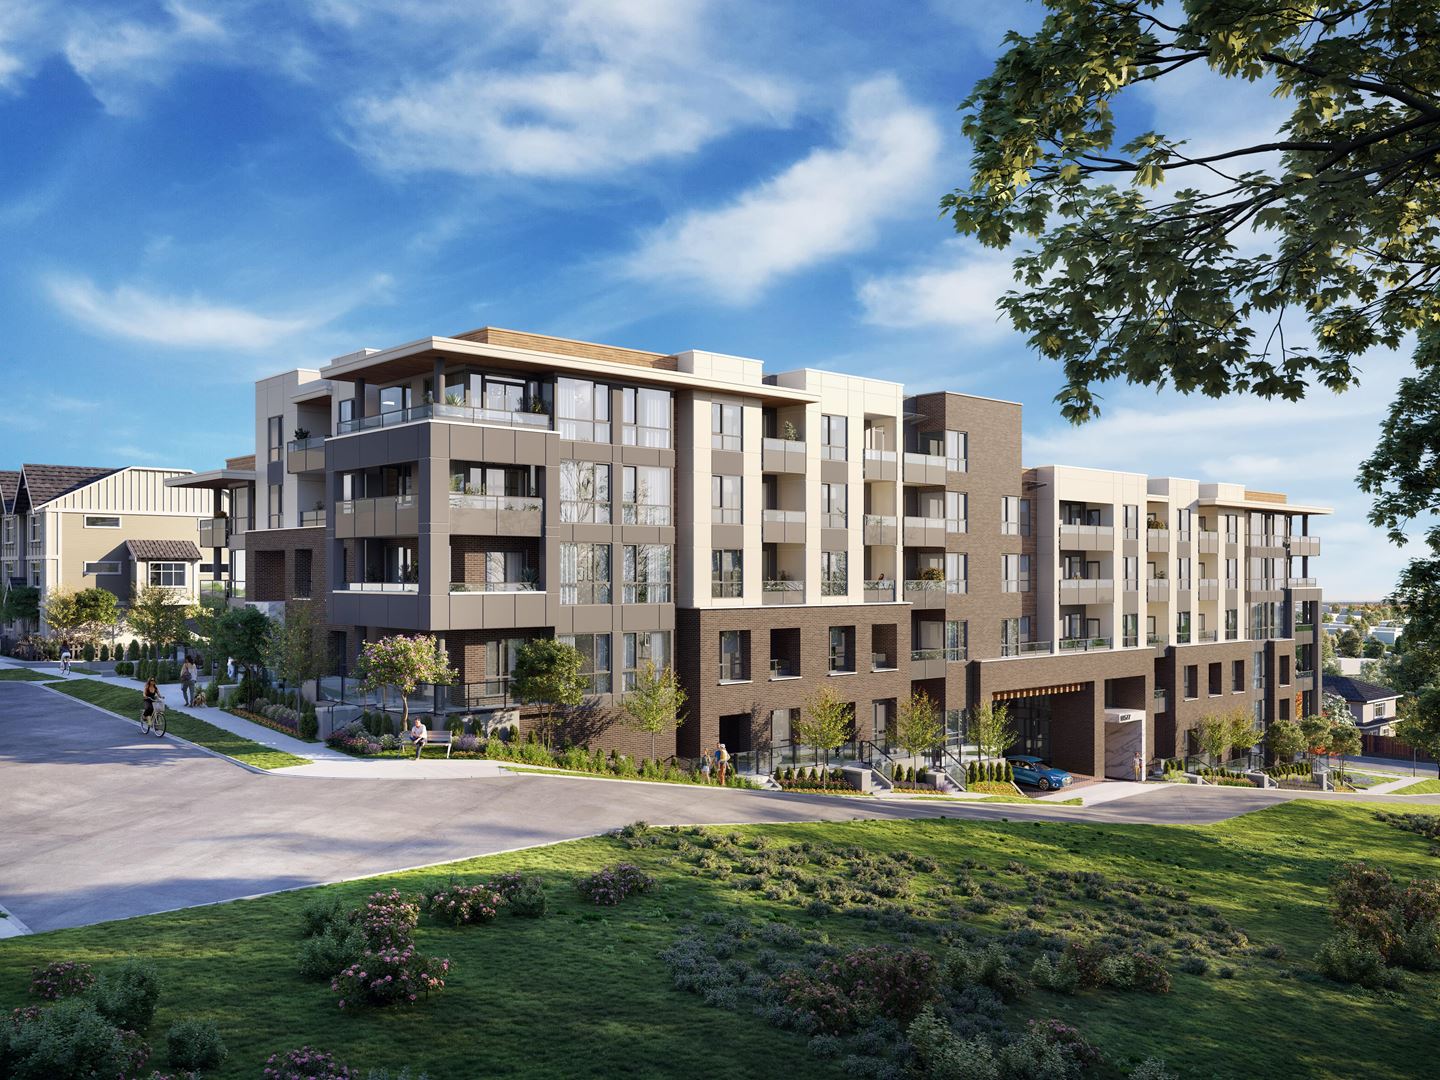 A collection of 130 condominiums and 2 townhomes coming soon to Clayton Heights.